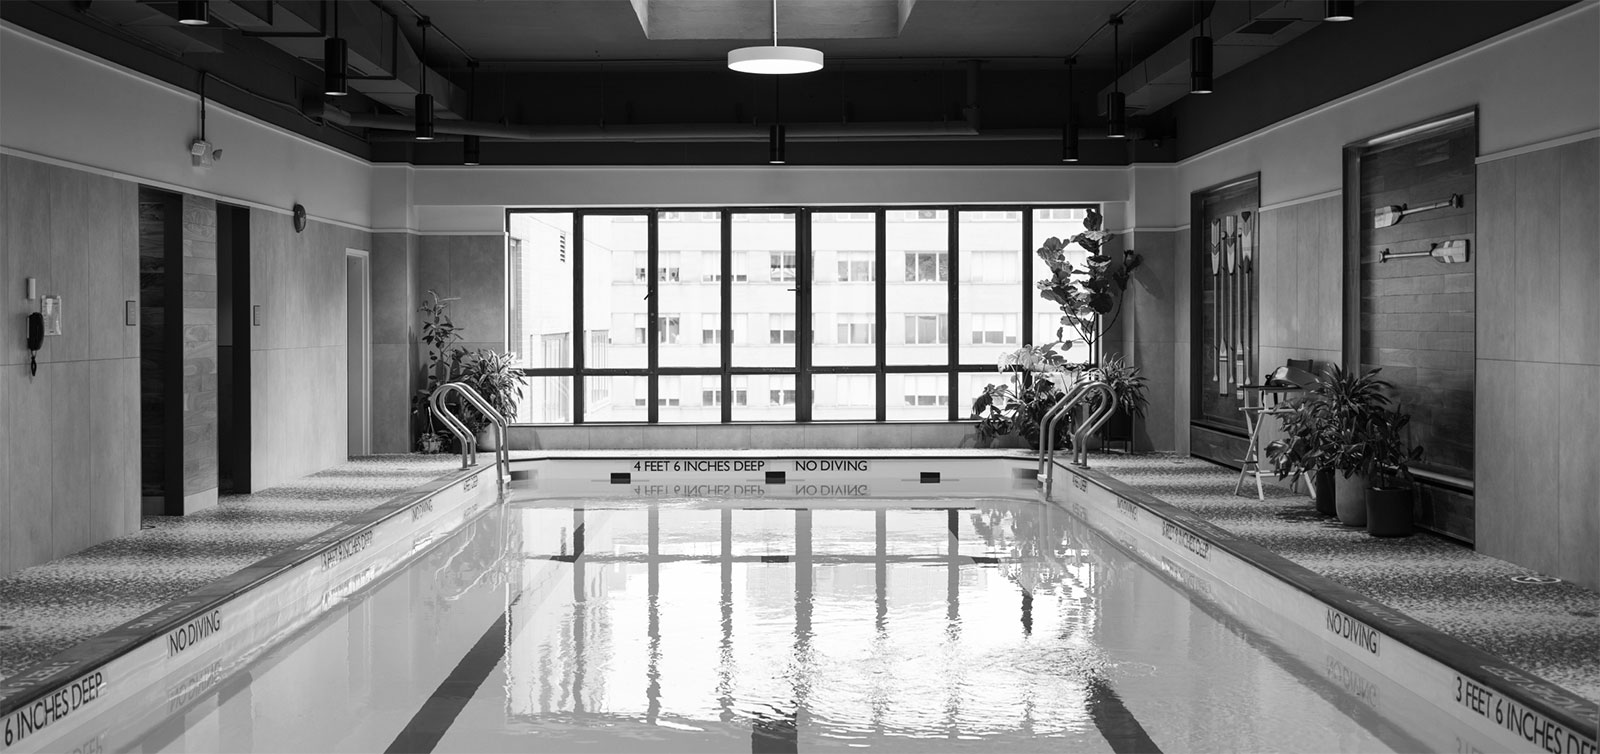 South Park Tower Indoor Pool